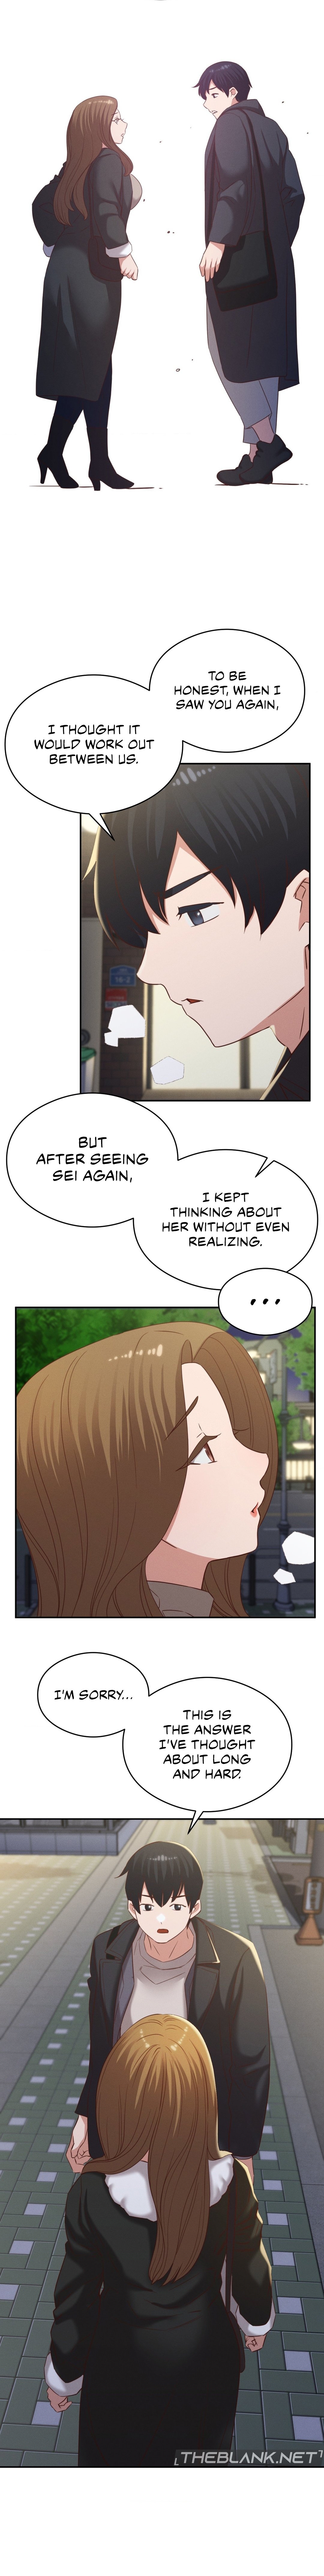 Shall We Go To The Ryokan Together? - Chapter 30 Page 6